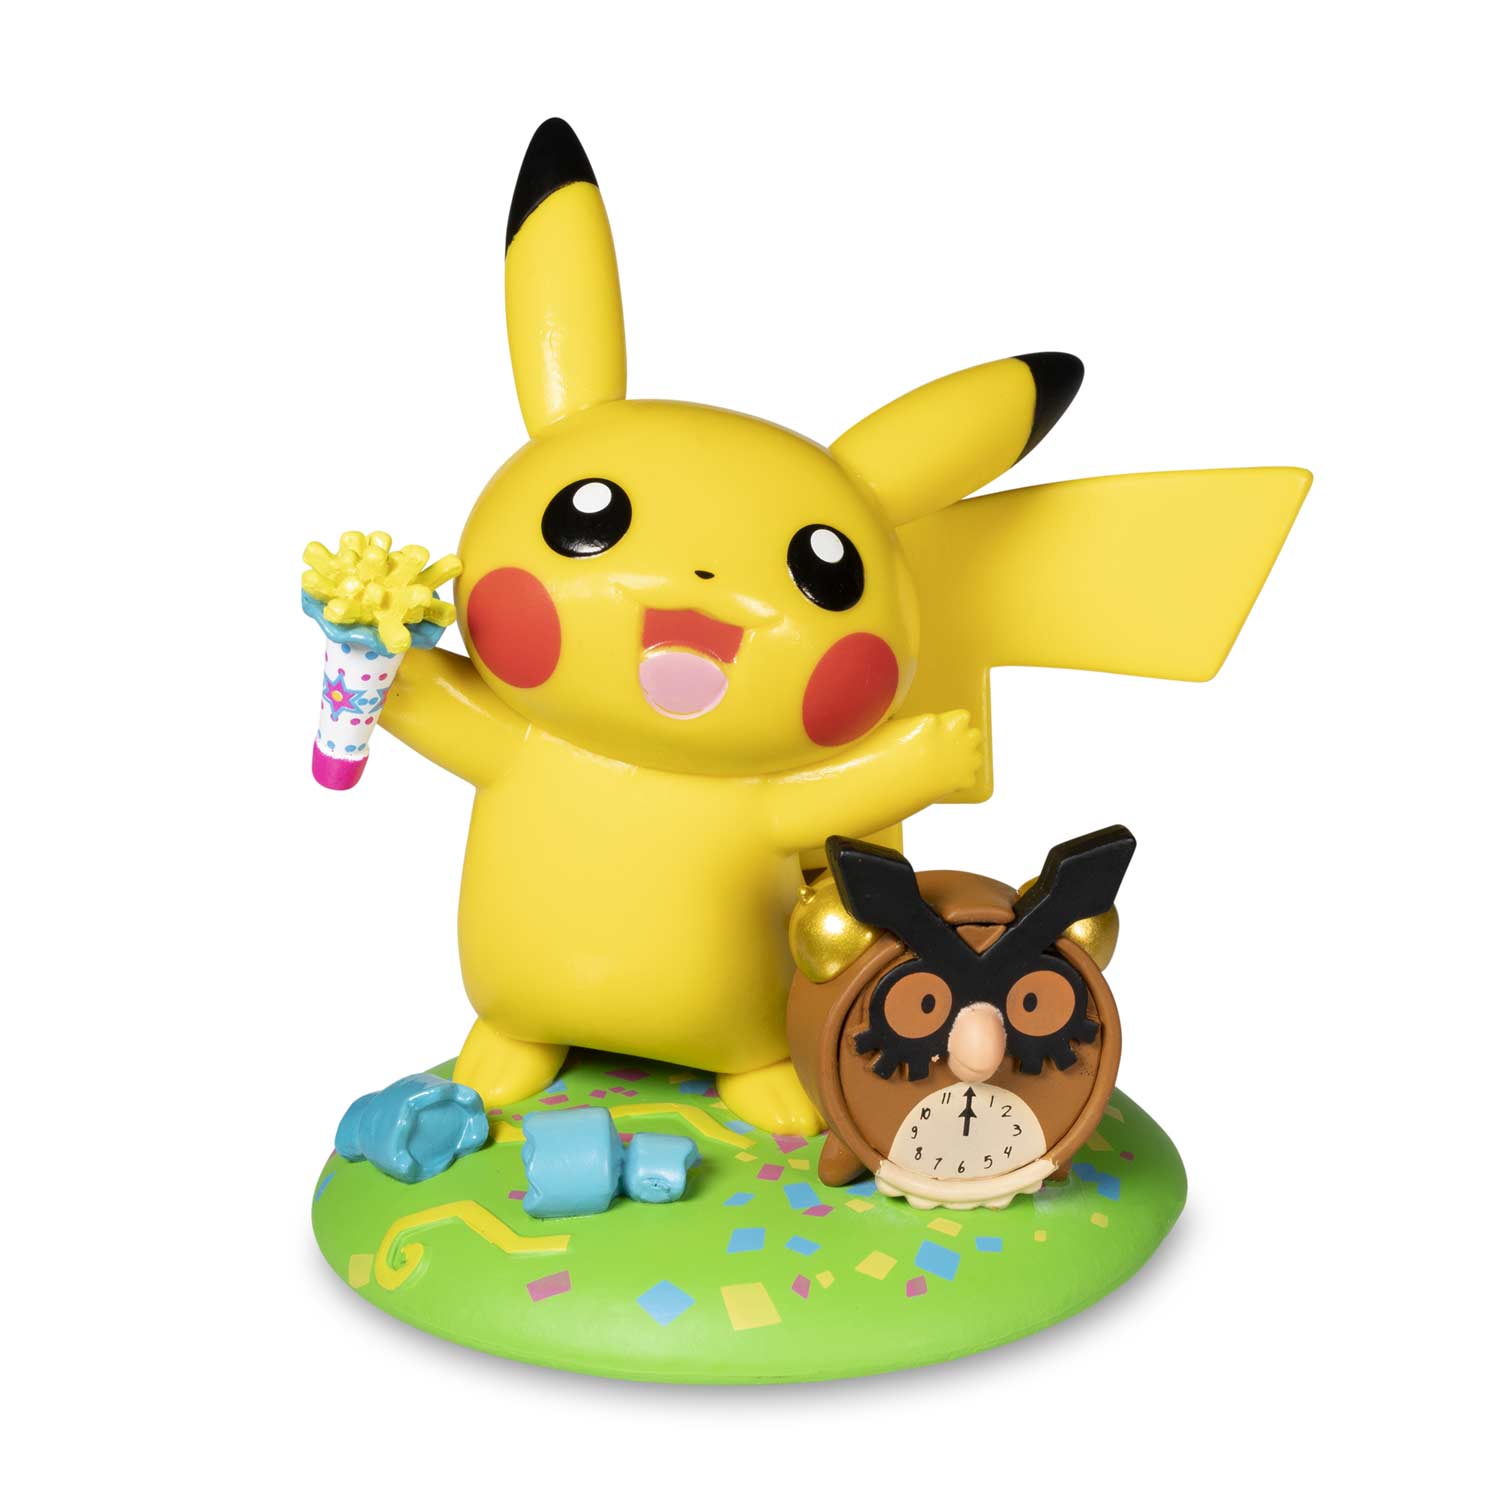 *IN HAND* Funko A Day With Pikachu Ringing In The Fun Pokemon Figure By Funko